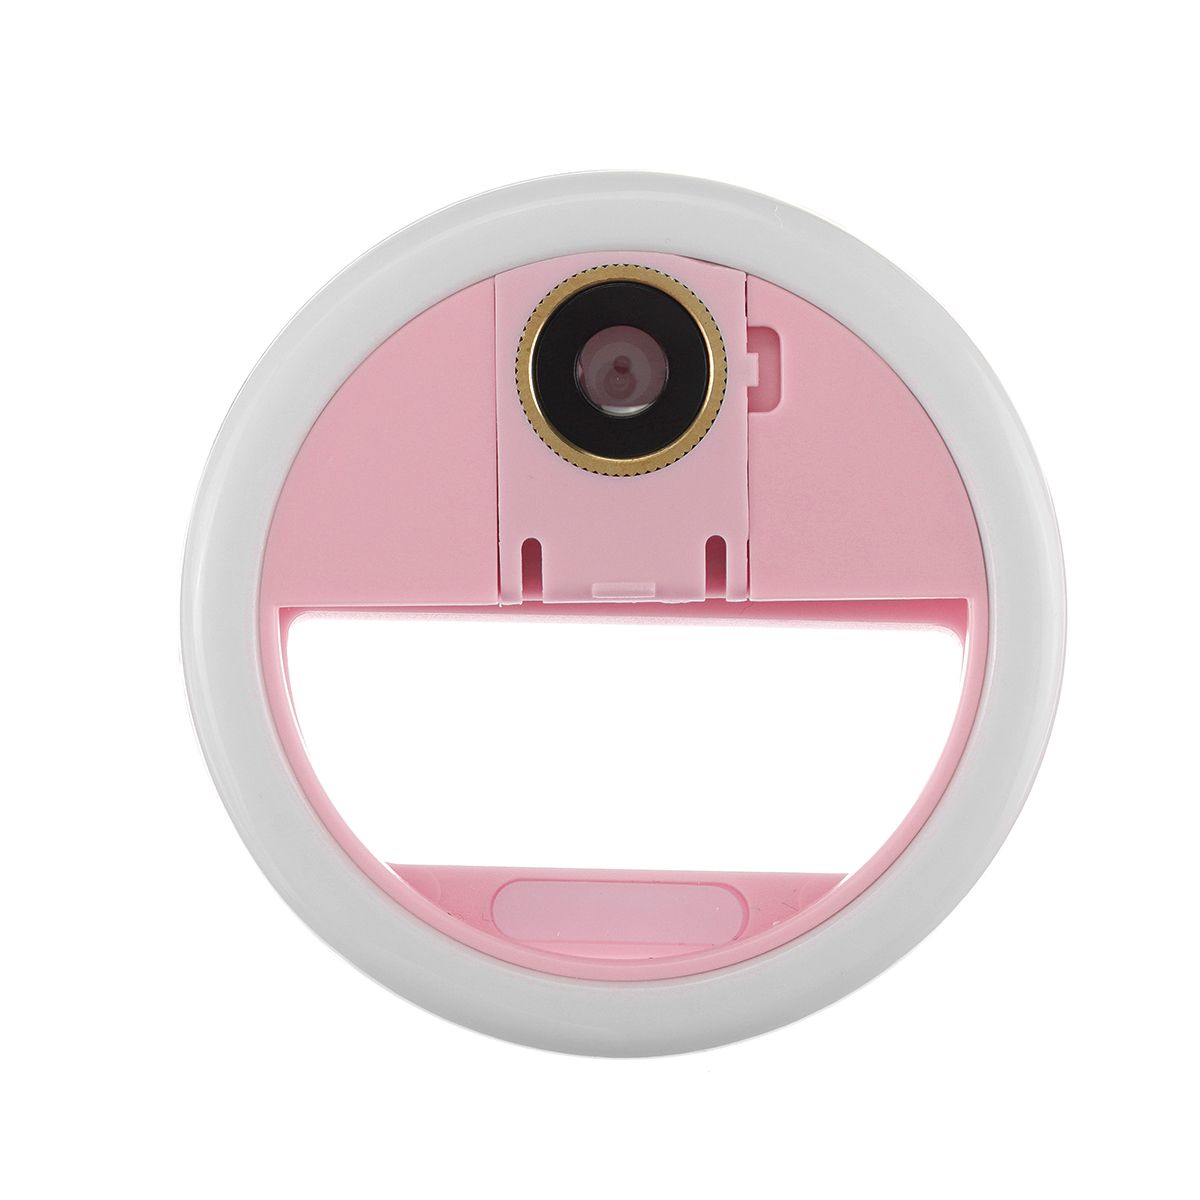 USB-Selfie-LED-Light-Ring-Dimmable-Lamp-Flash-Fill-Clip-Camera-for-Smartphone-1526348